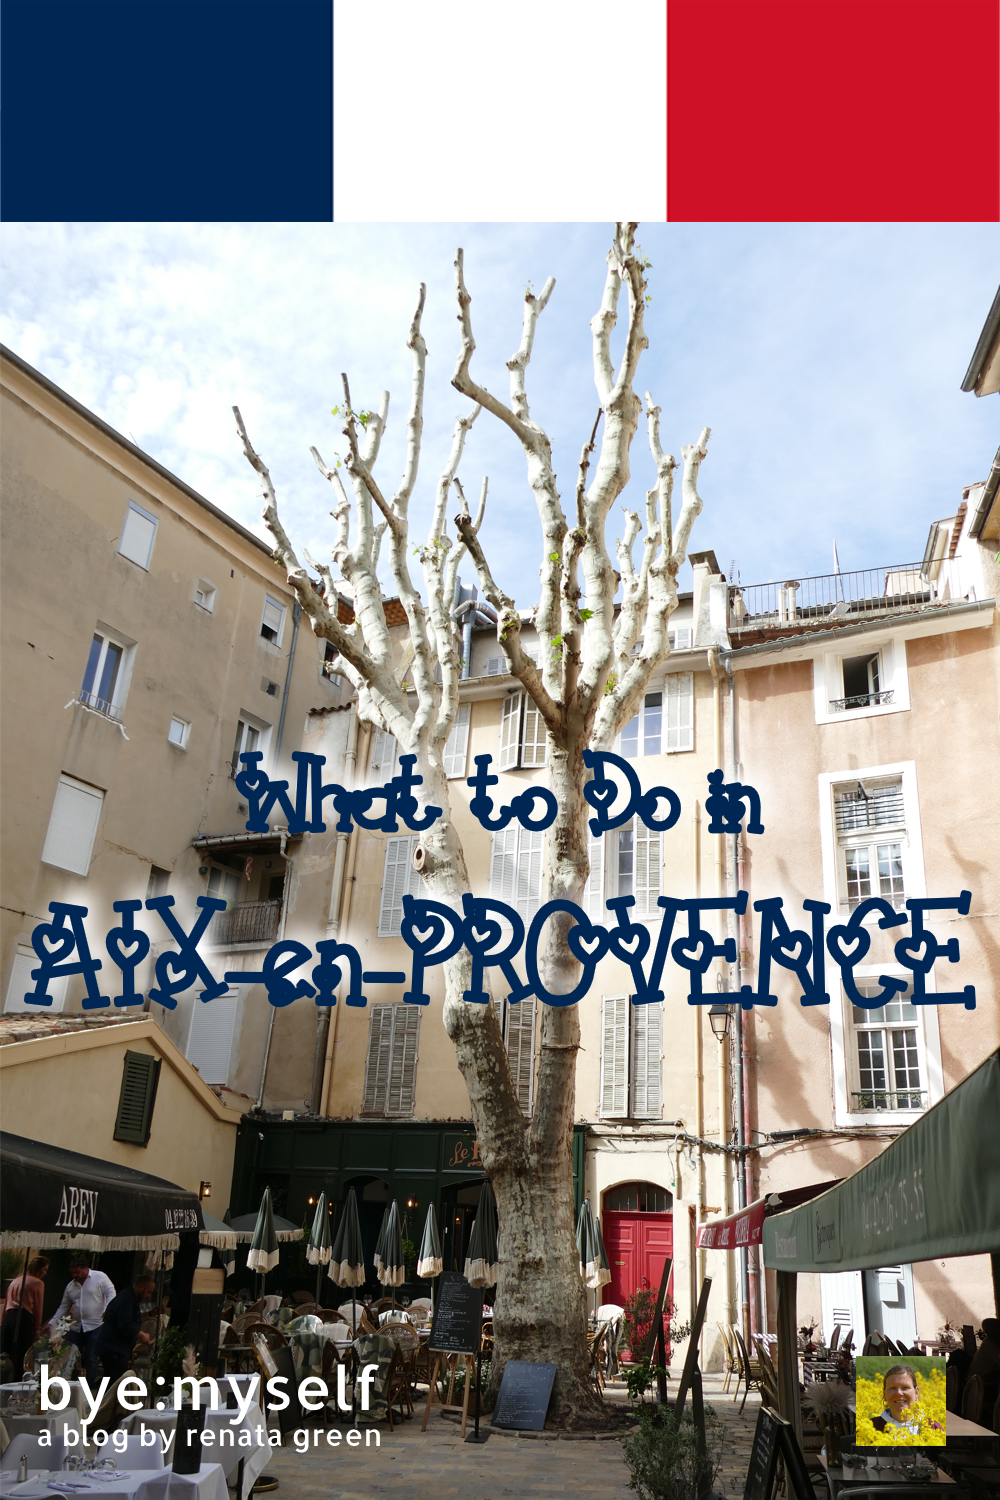 250 fountains, countless hot springs and and 300 days of sunshine a year. Bouillabaisse and ratatouille, Calisson and local wine - in this post, I'll show you what to do in Aix-en-Provence, one of France's most exquisite cities. #aixenprovence #provence #france #europe #art #cezanne #paulcezanne #citytrip #weekendtrip #travel #byemyself